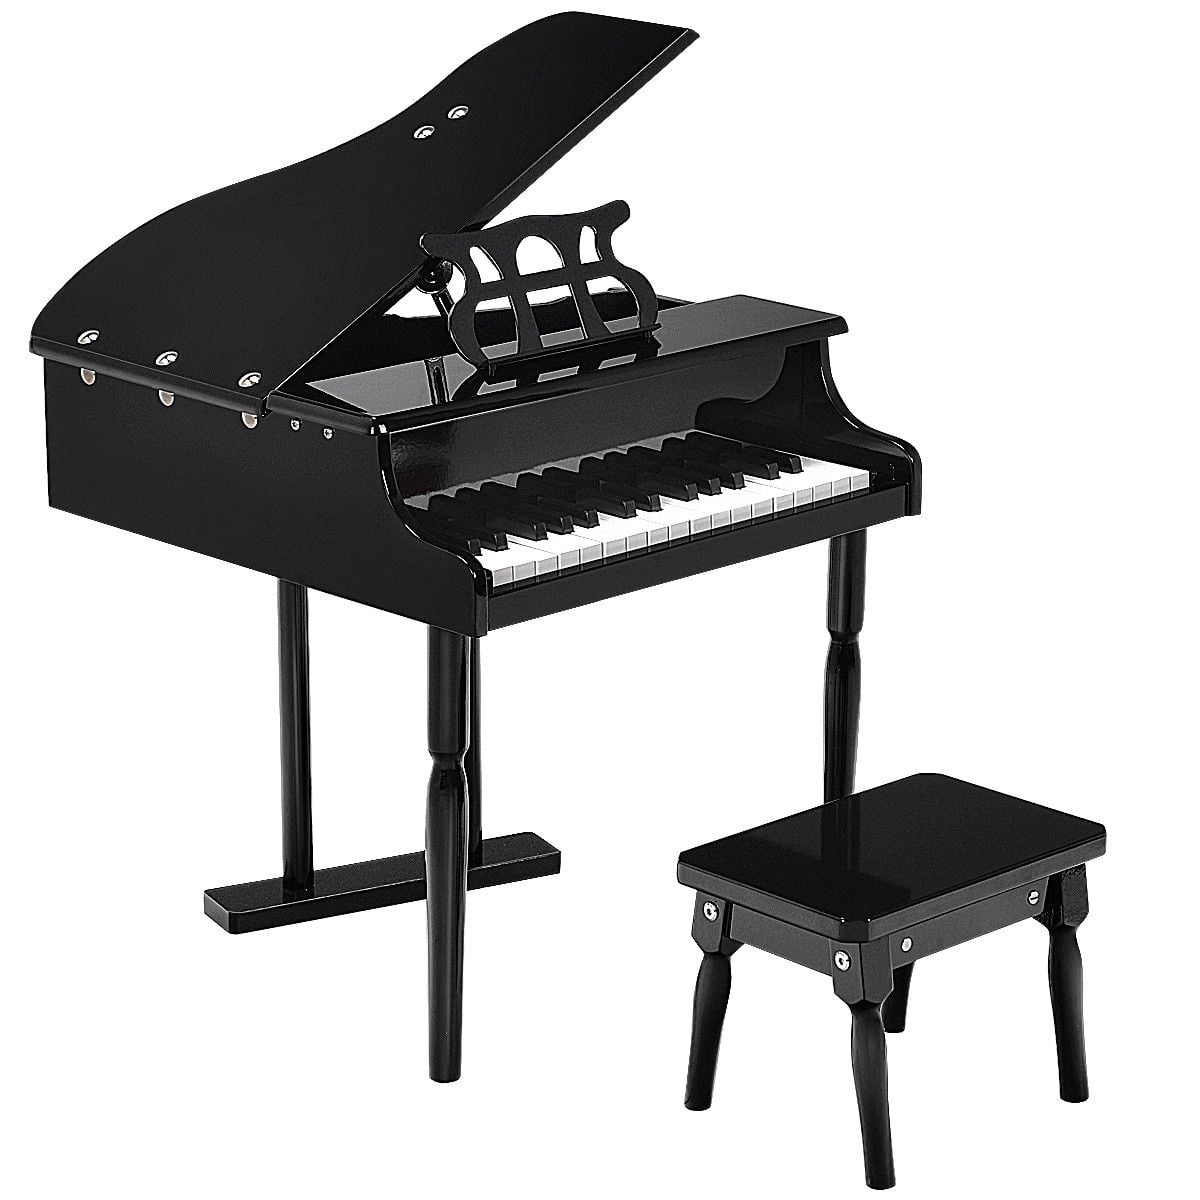 30 Keys Mini Kids Piano for Child with Music Stand and Bench Best Gifts Toy 